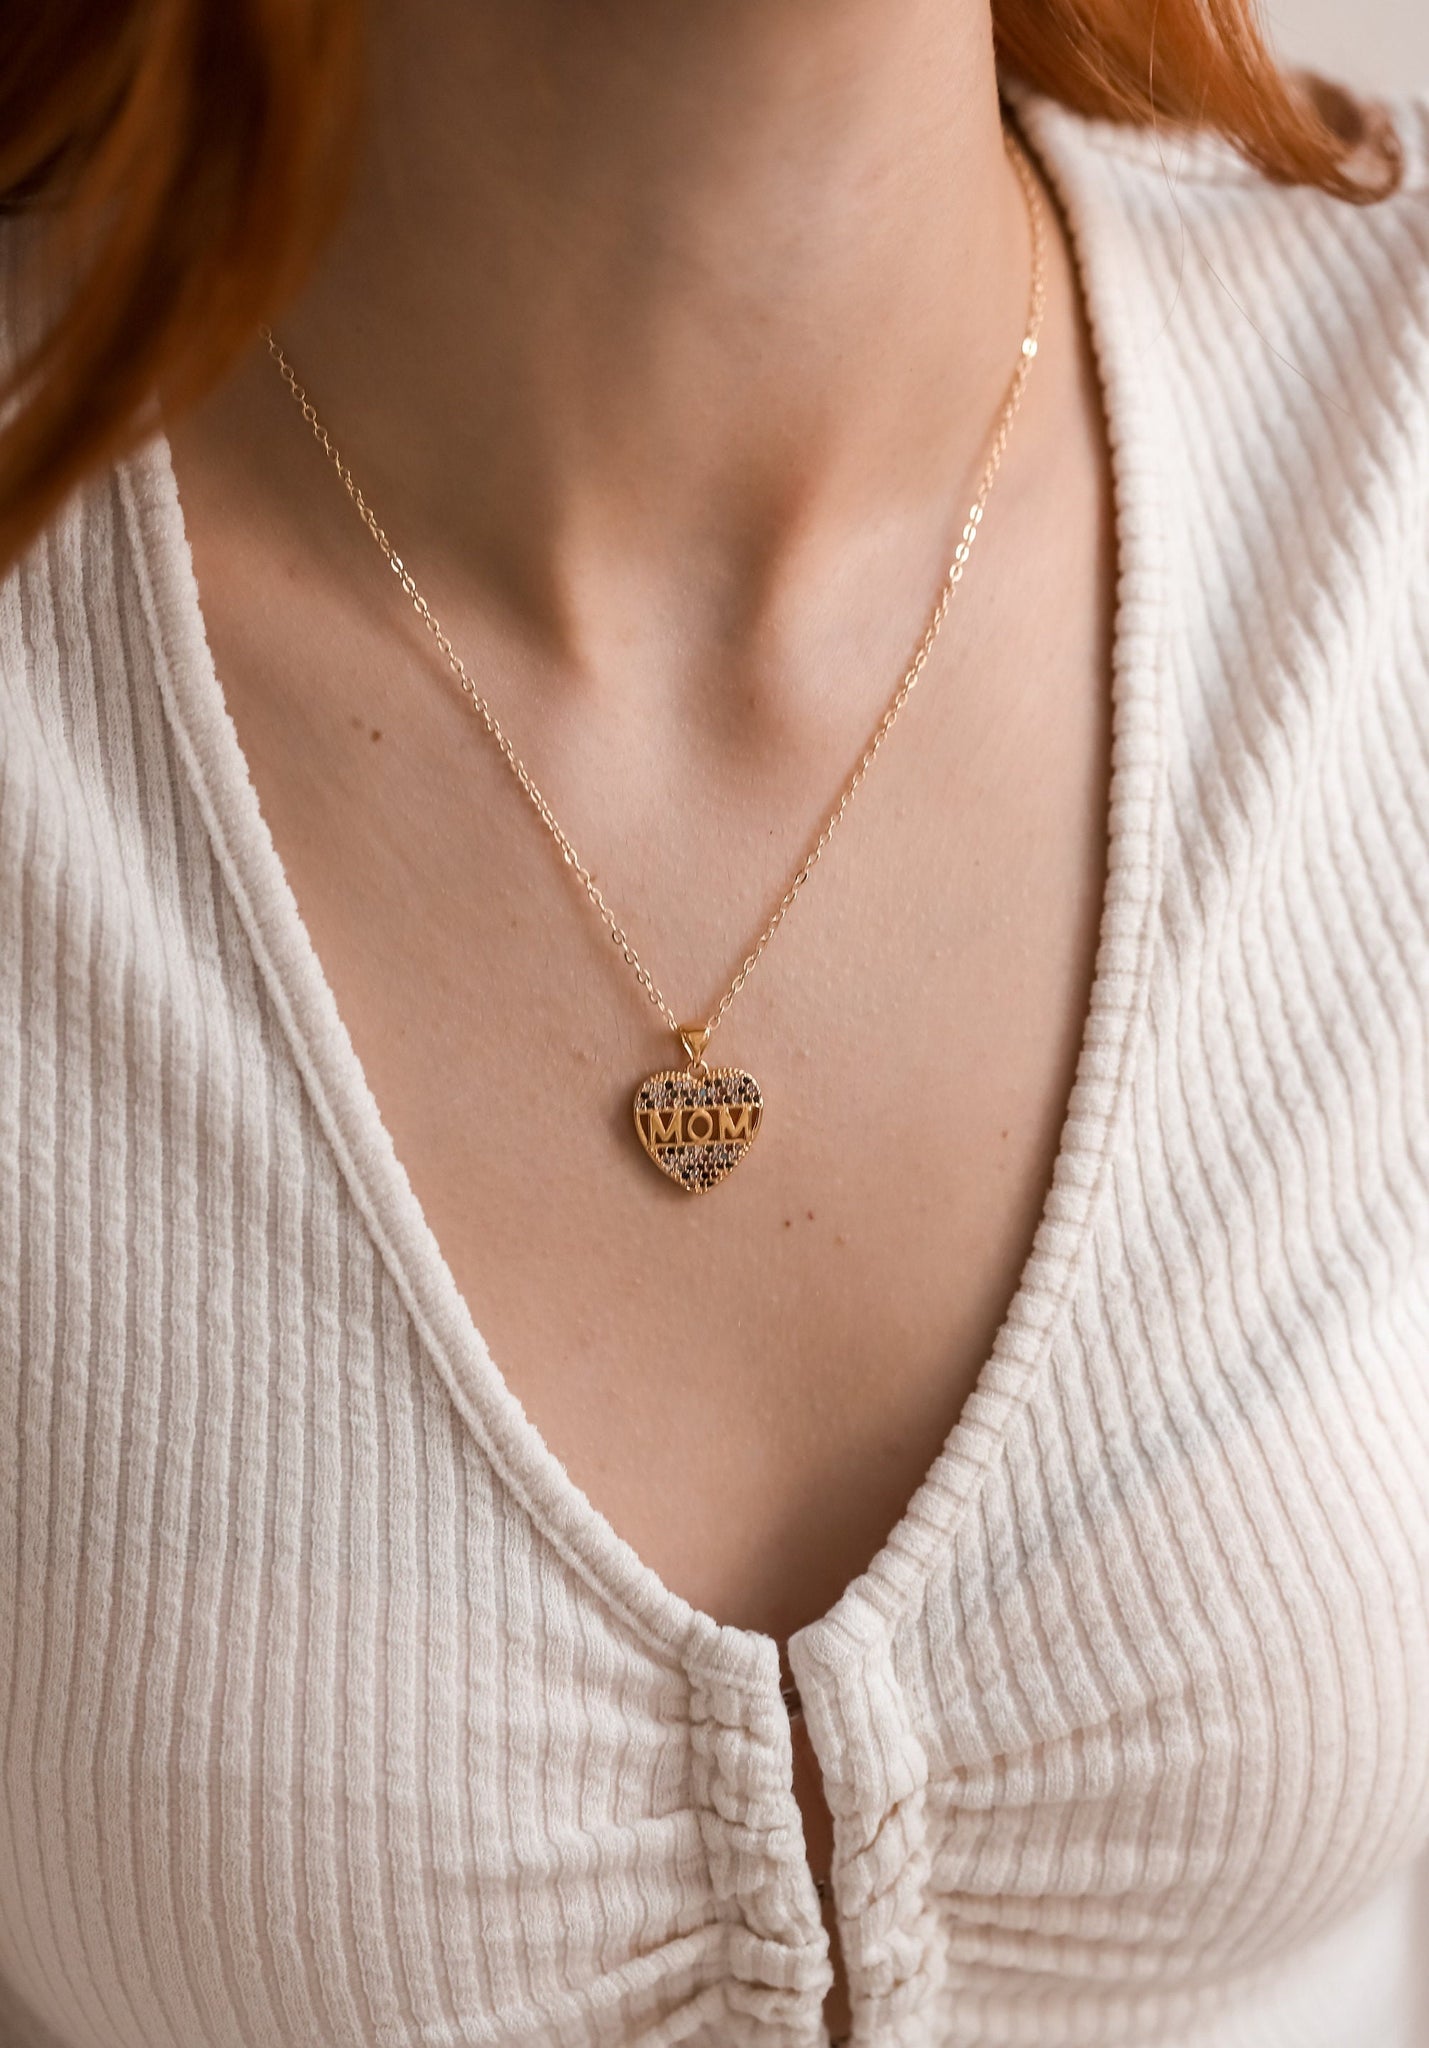 Heart Mom Necklace, 18K Gold, Colorful Zirconia Necklace, Mom Jewelry, Dainty Necklace, Mothers Day Gift, Minimalist Everyday Necklace